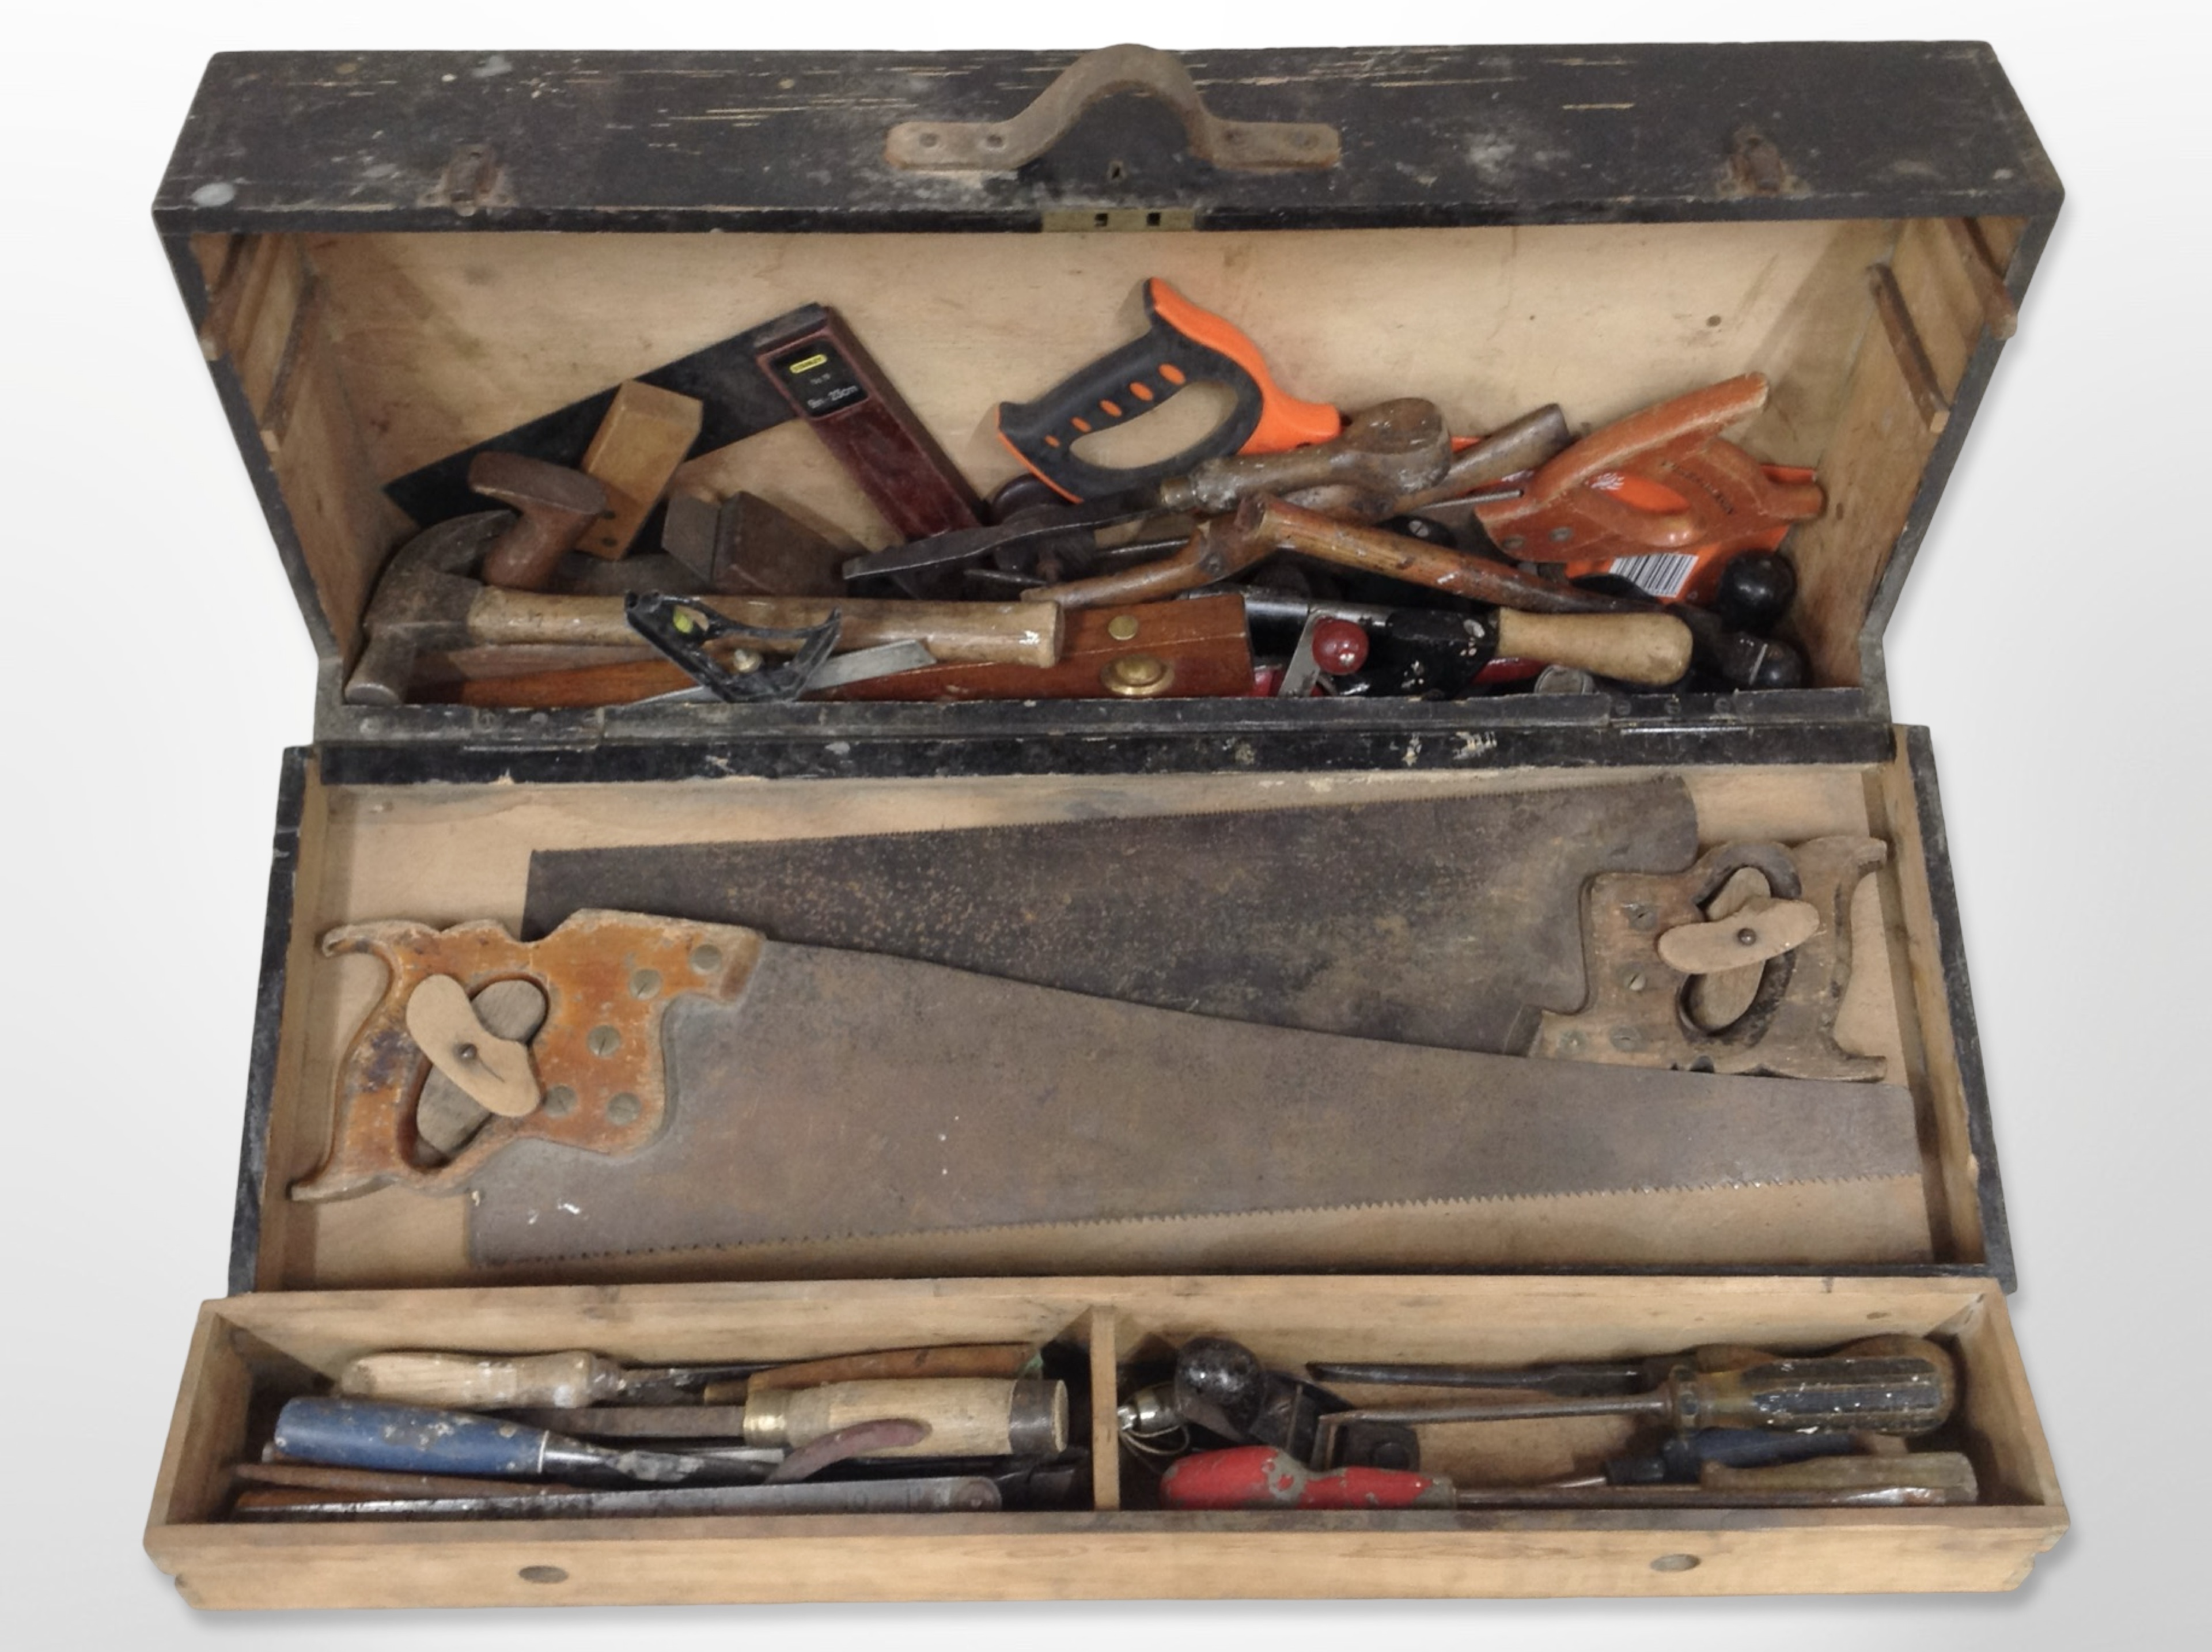 An antique joiner's tool box containing carpentry tools.